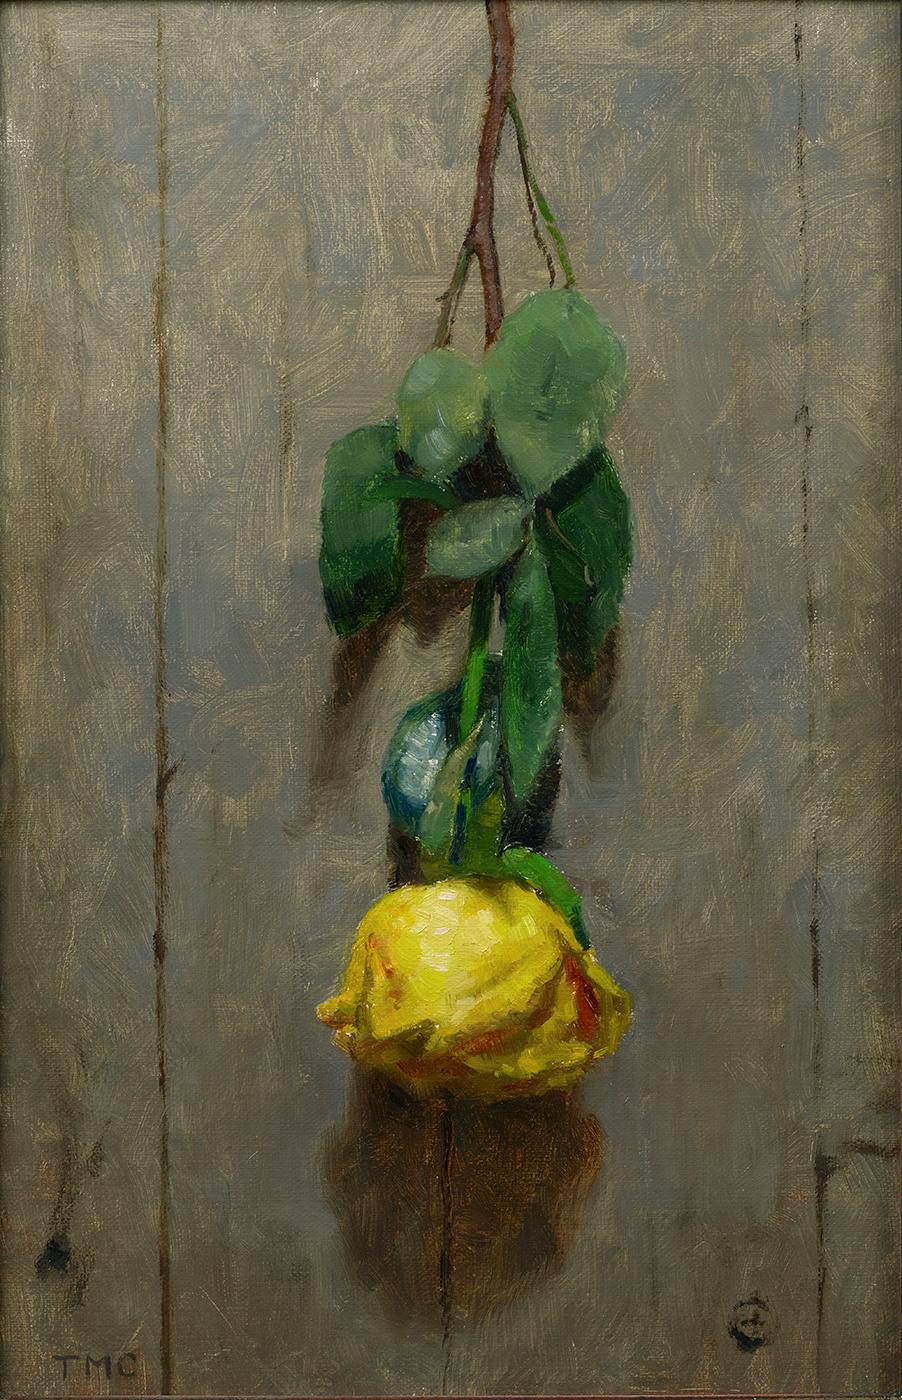 A studio work by Todd M. Casey.
Exhibited: The Art of Still Life, 2020